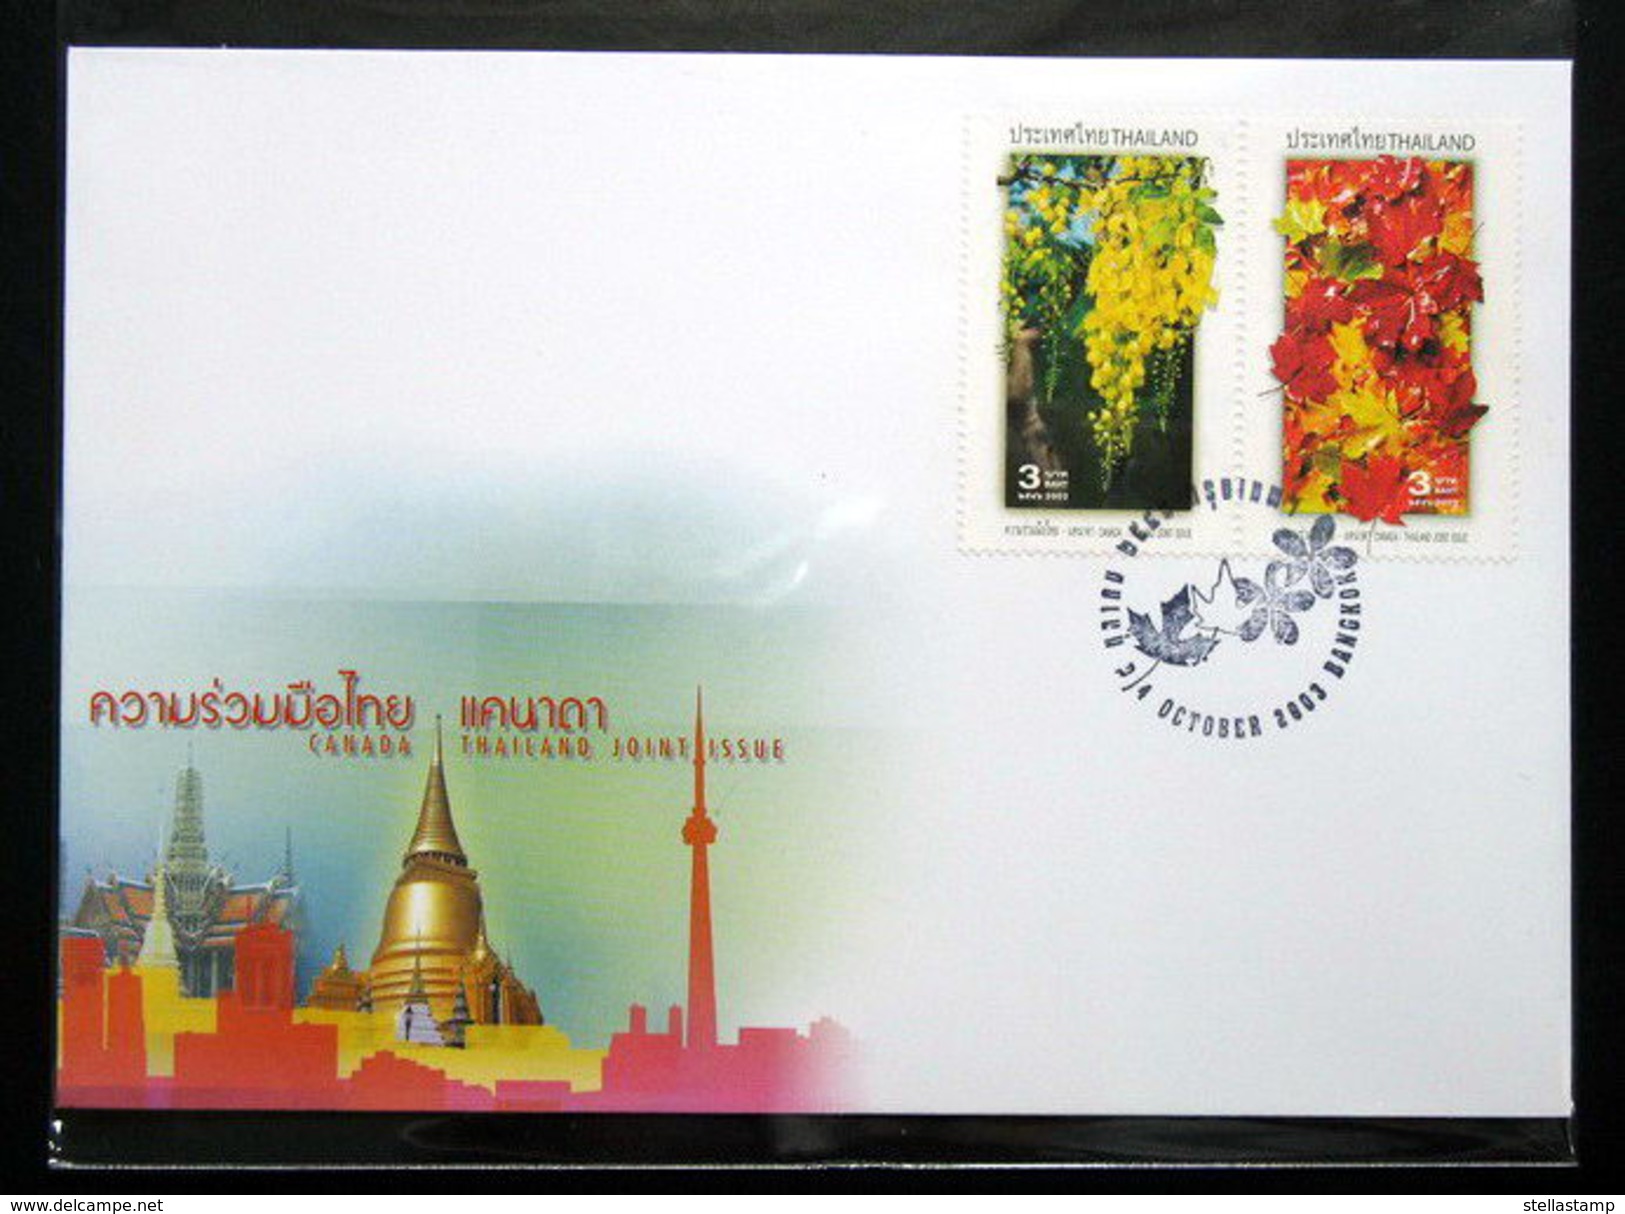 Thailand Stamp FDC 2003 Canada - Thai Joint Issue - Tailandia